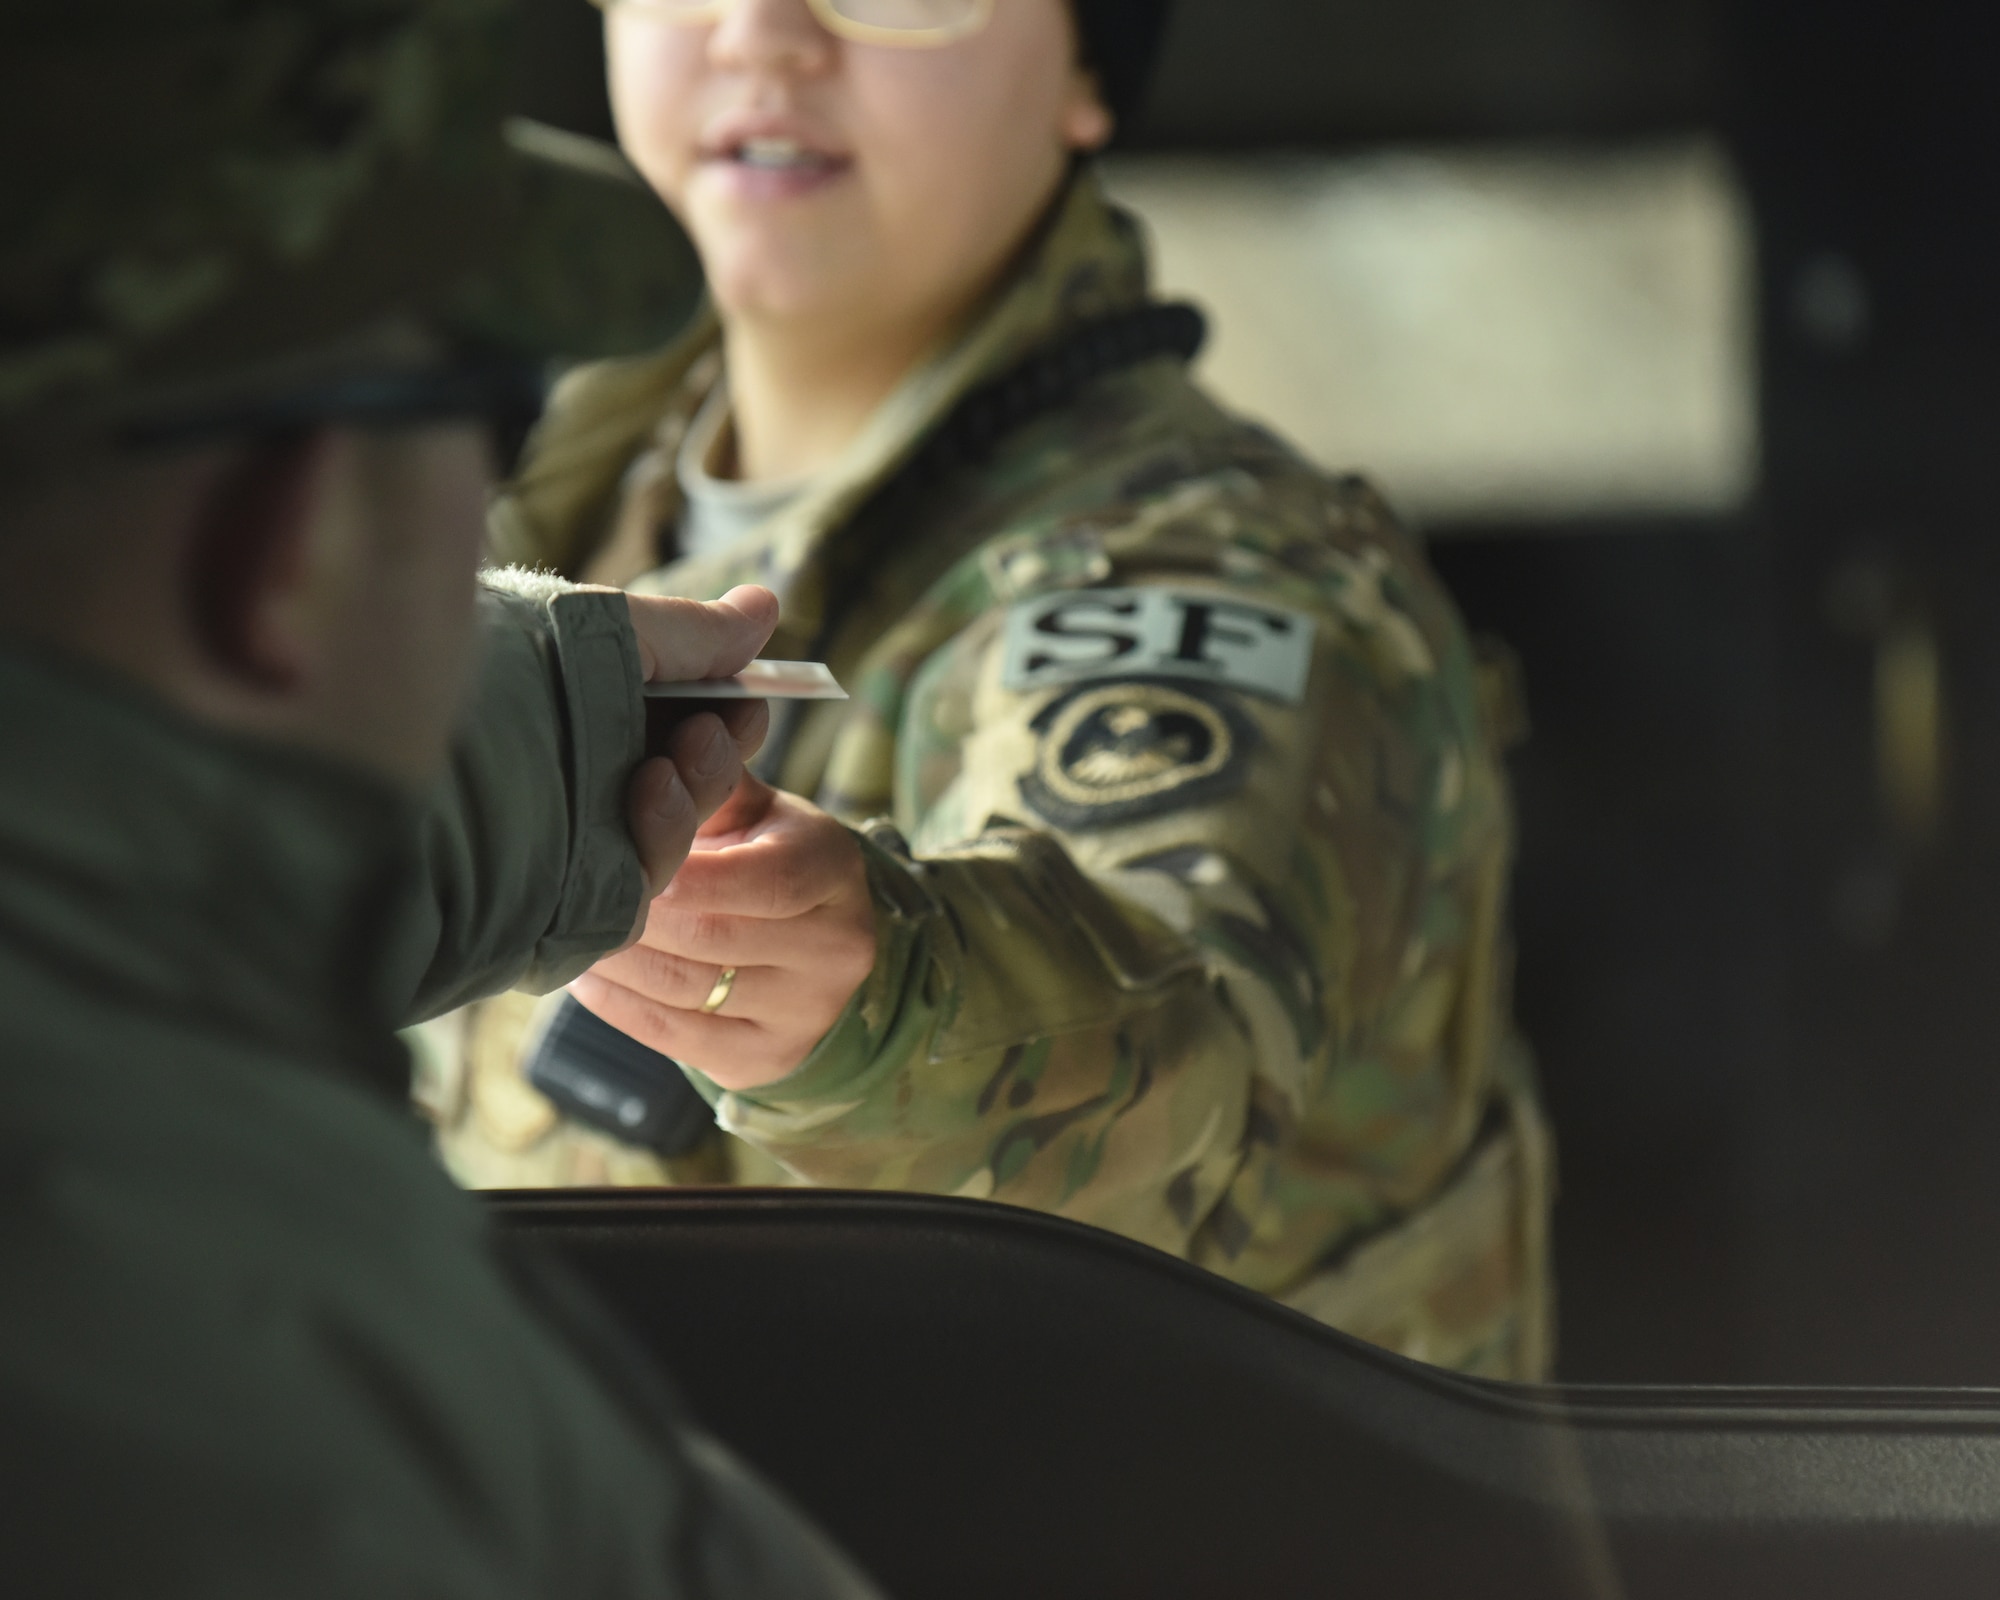 Airman 1st Class Gabriella Sepulveda, a 28th Security Forces Squadron response force member, hands an Airman back his common access card after scanning it at the gate to Ellsworth Air Force Base, S.D., Dec. 4, 2018. Each person that comes through the gate gets checked for proper authorization, correct seatbelt wear and that their vehicle has registration on the plates. (U.S. Air Force photo by 2nd Lt. Joshua Sinclair)